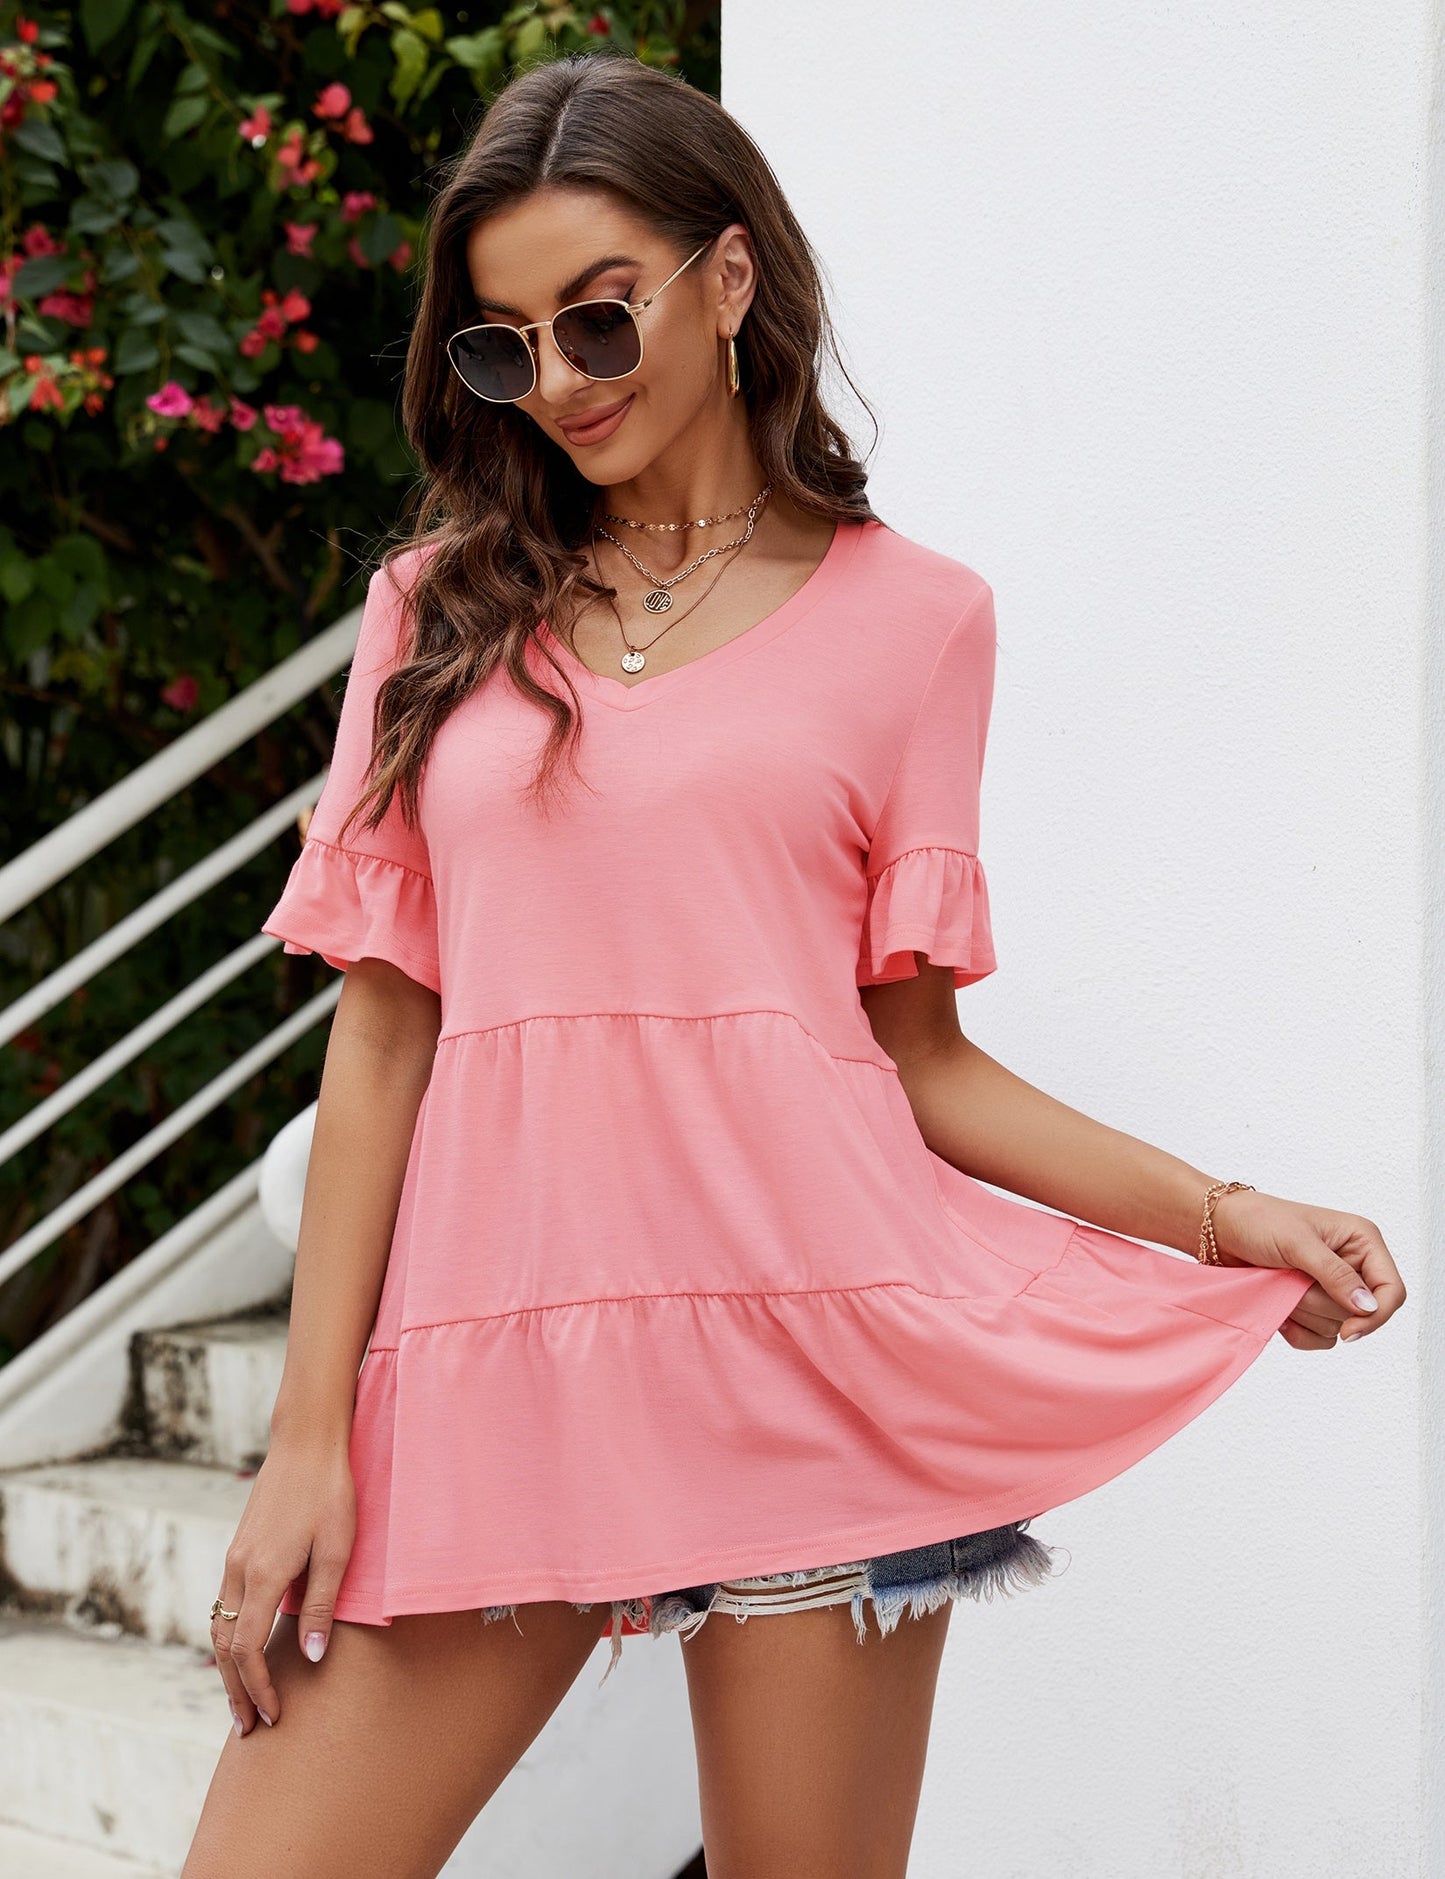 CLEARLOVE Peplum Tops for Women Summer Casual V Neck T Shirts Pink